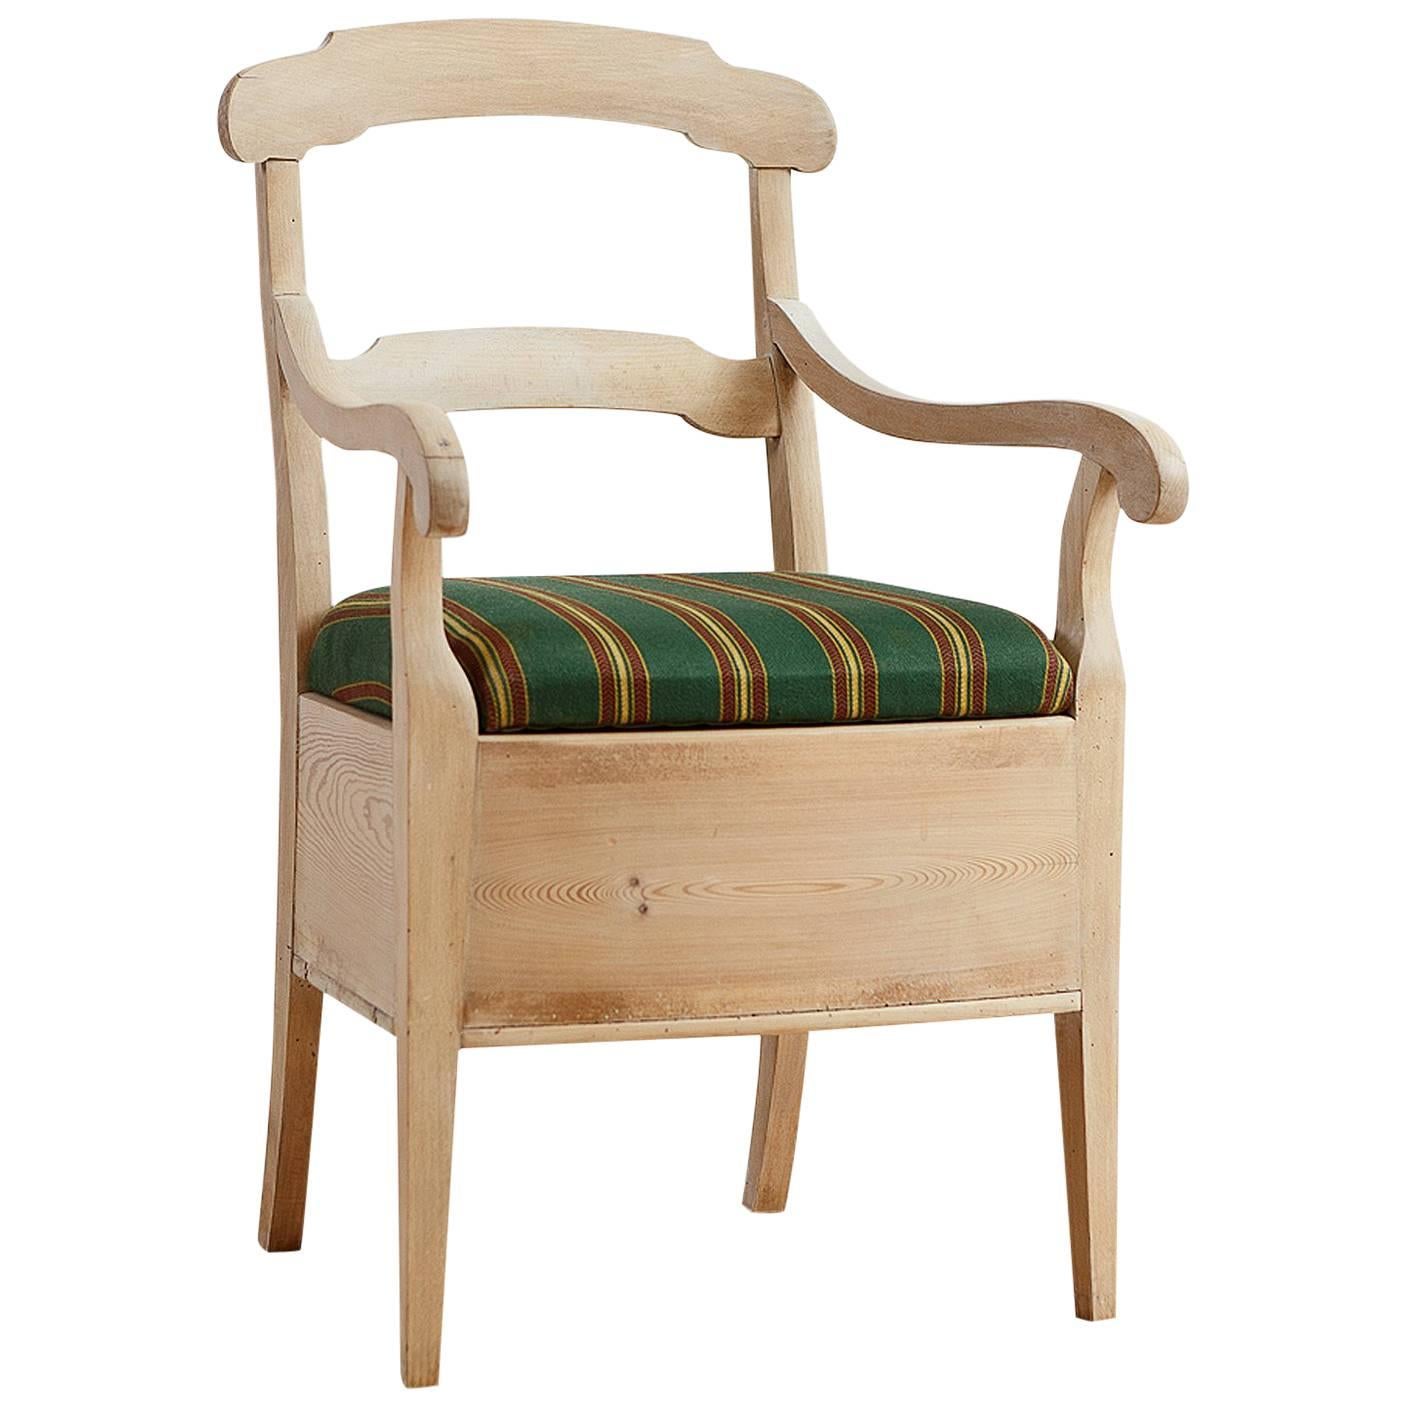 North German Potty Chair in Pine with Chalk Finish and Upholstered Seat, c. 1820